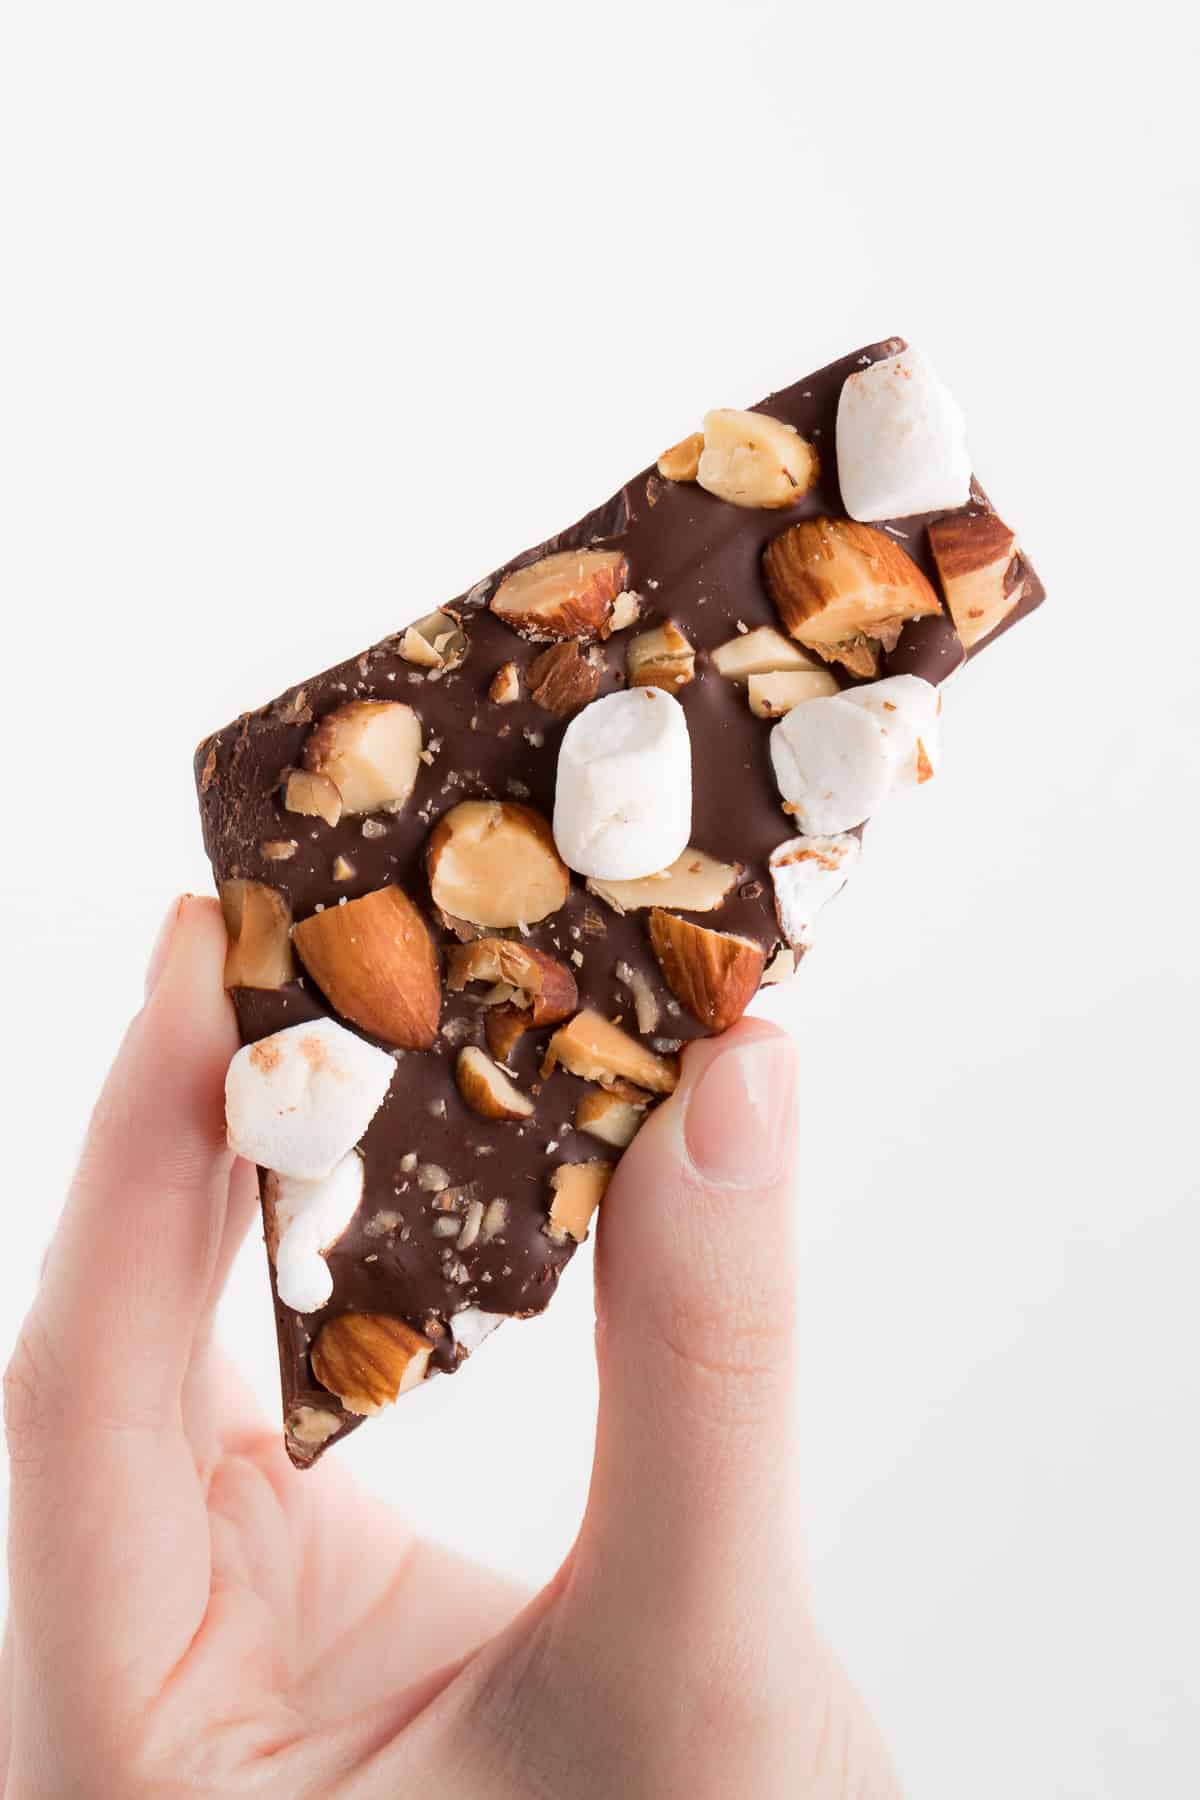 hand holding a piece of rocky road chocolate bark with marshmallows and almonds